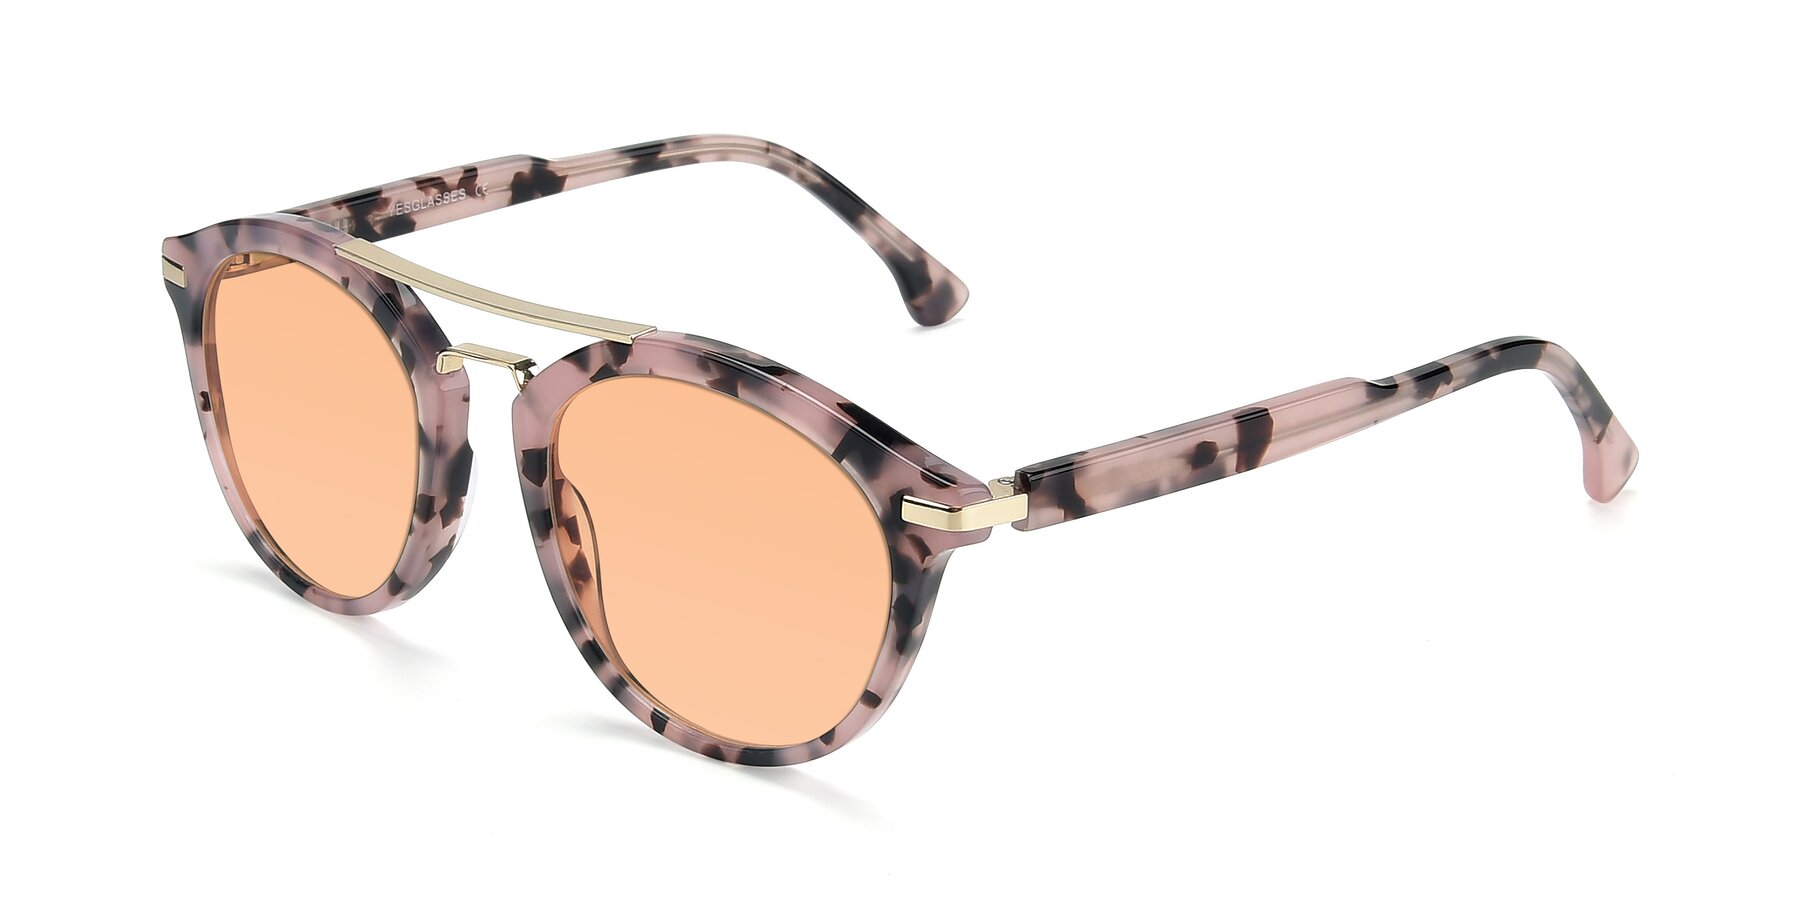 Angle of 17236 in Havana Floral-Gold with Light Orange Tinted Lenses